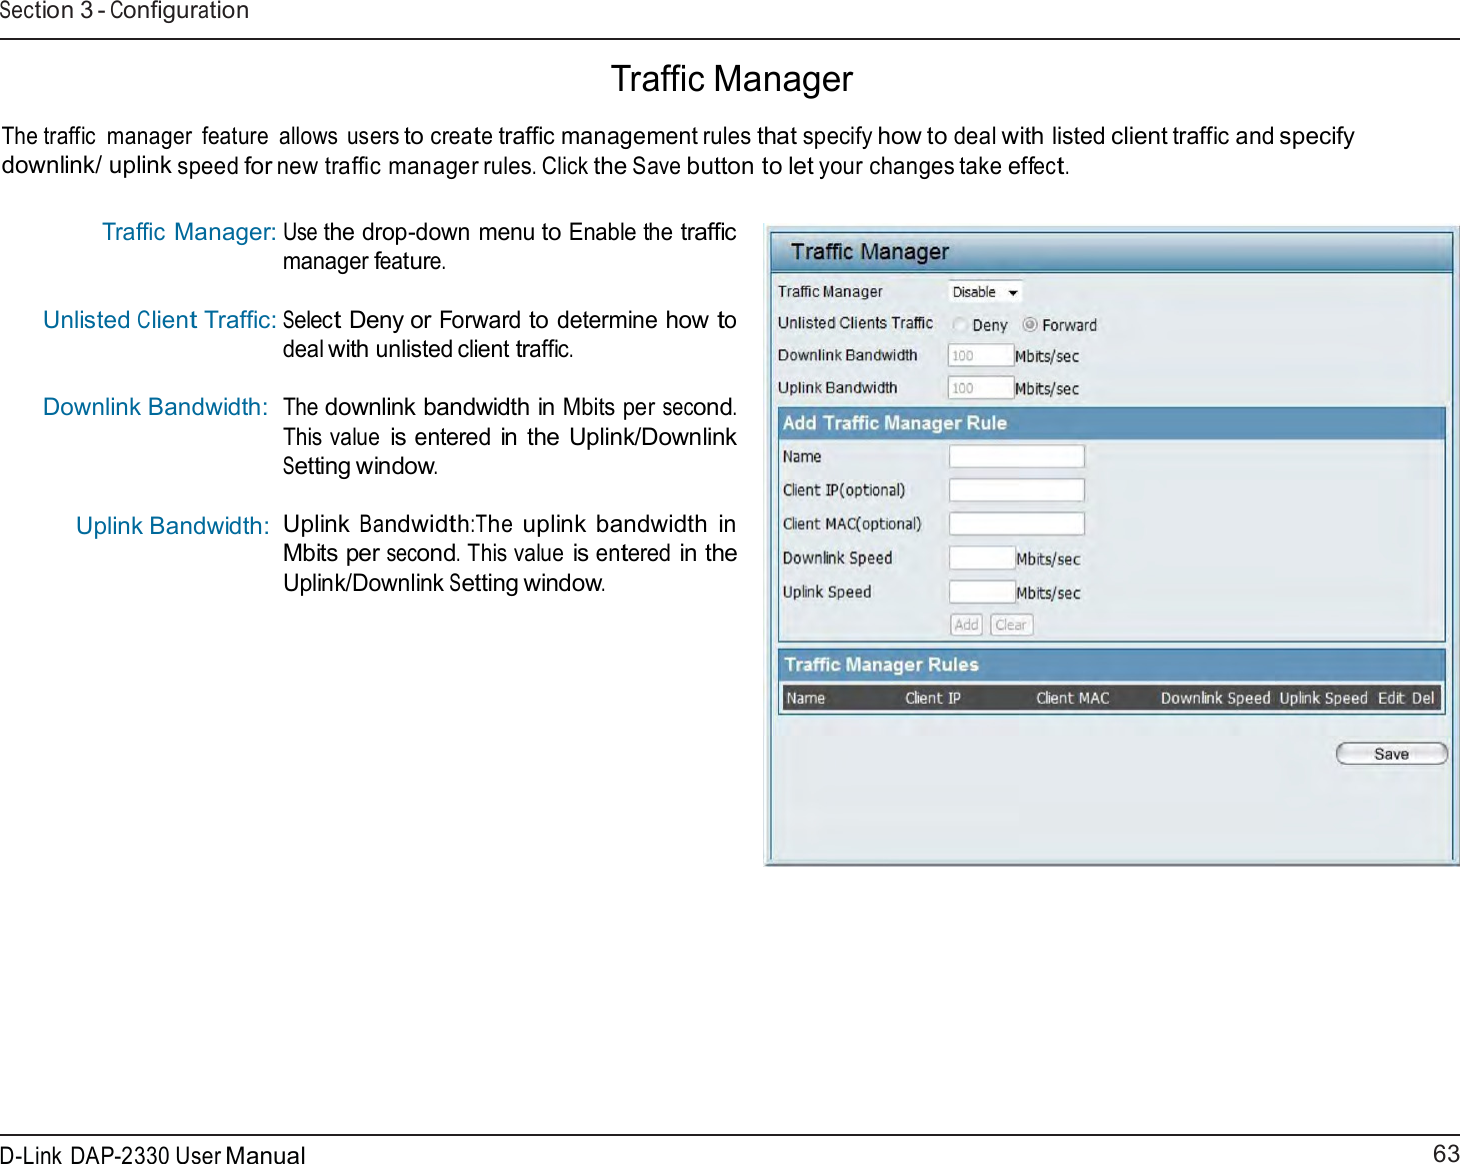 63 D-Link DAP-2330 User ManualSection 3 - Configuration    Traffic Manager  The traffic  manager  feature  allows users to create traffic management rules that specify how to deal with listed client traffic and specify downlink/ uplink speed for new traffic manager rules. Click the Save button to let your changes take effect.   Traffic Manager: Unlisted Client Traffic: Downlink Bandwidth:   Uplink Bandwidth: Use the drop-down menu to Enable the traffic manager feature.  Select Deny or Forward to determine how to deal with unlisted client traffic.  The downlink bandwidth in Mbits per second. This value is entered in the Uplink/Downlink Setting window.  Uplink Bandwidth:The uplink bandwidth in Mbits per second. This value is entered in the Uplink/Downlink Setting window. 